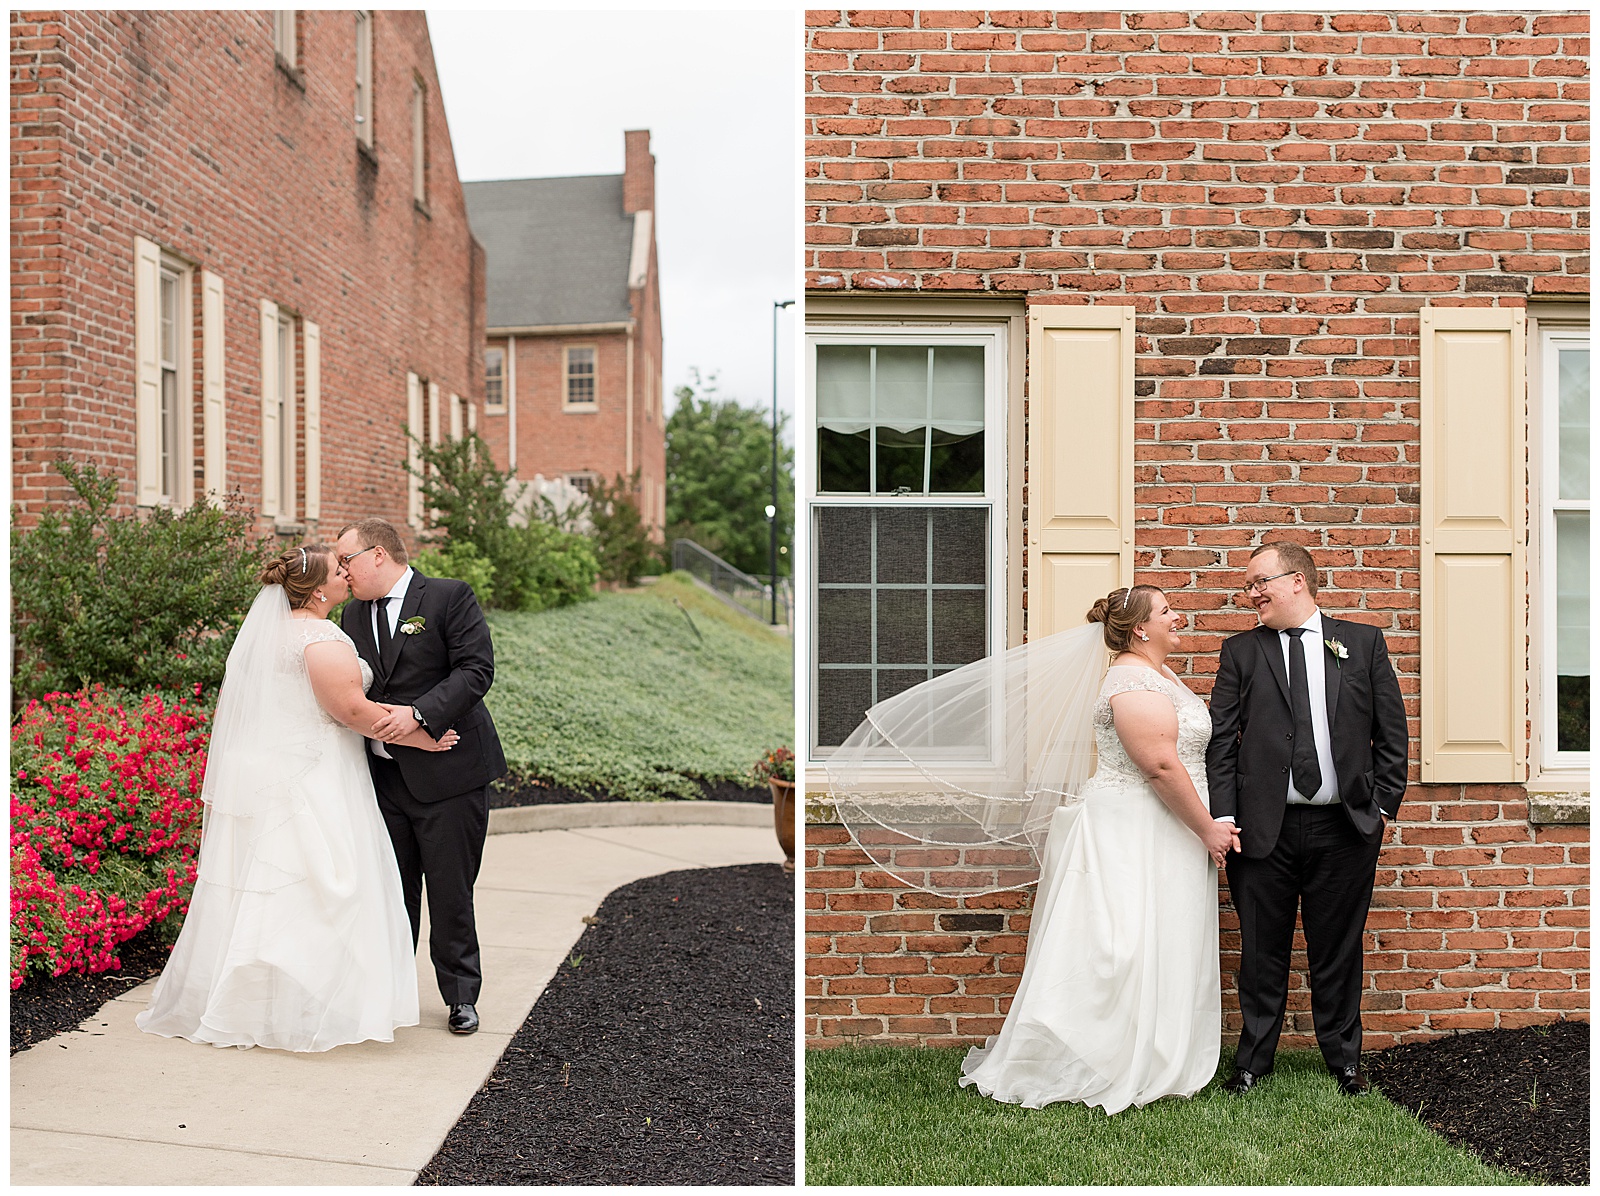 bride facing her groom as her veil blows behind her outside historic brick building at wedding reception